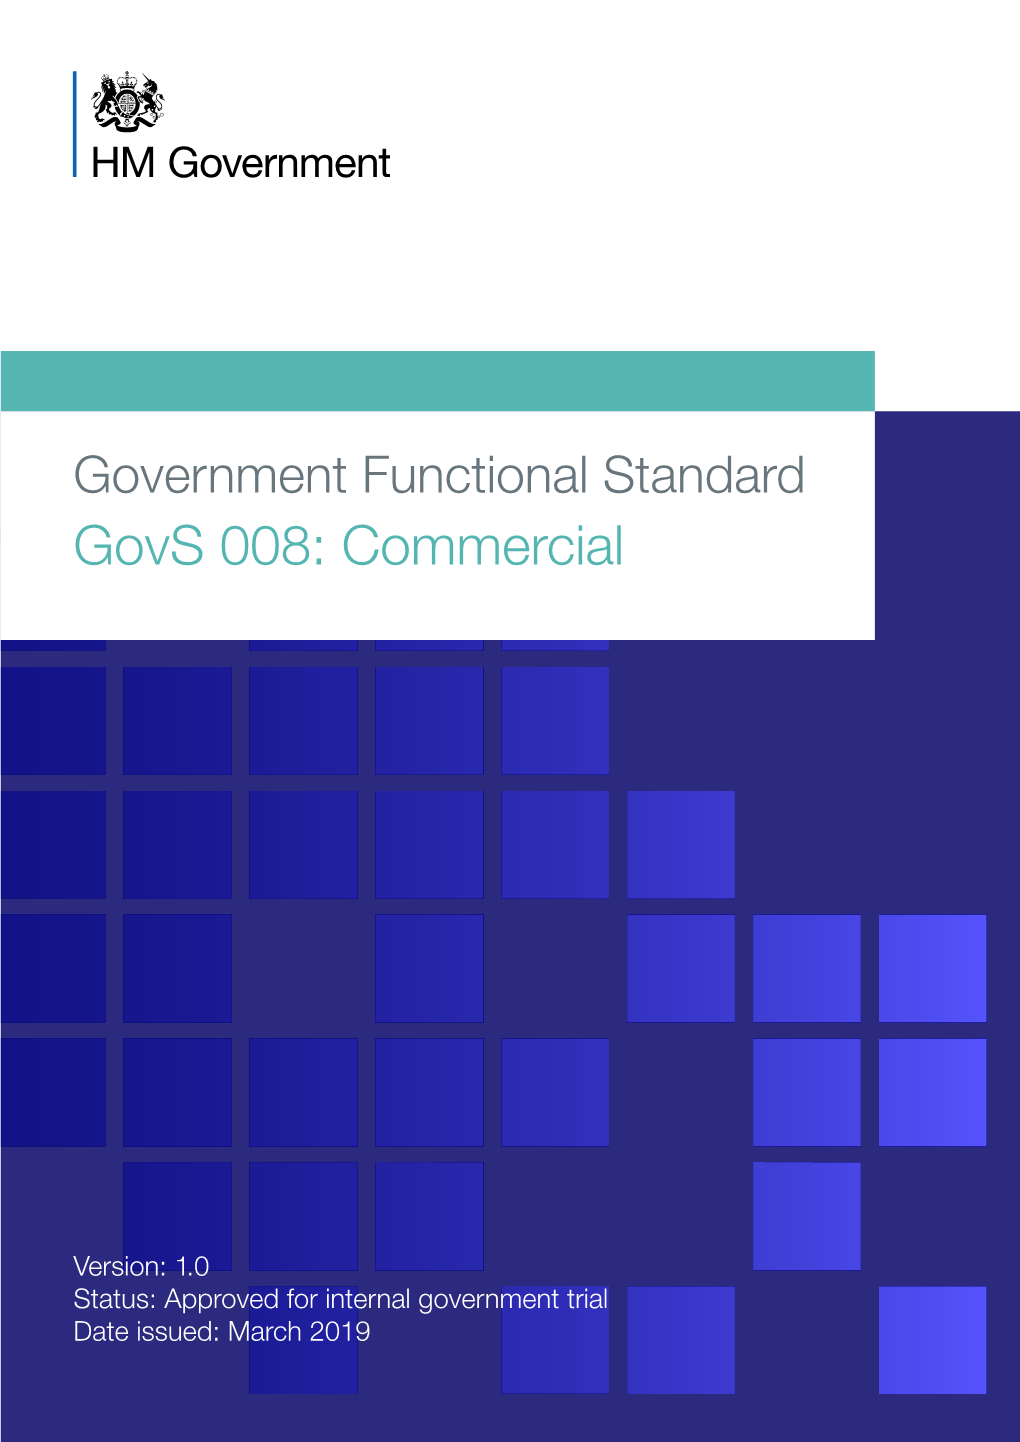 Government Functional Standard Govs 008: Commercial